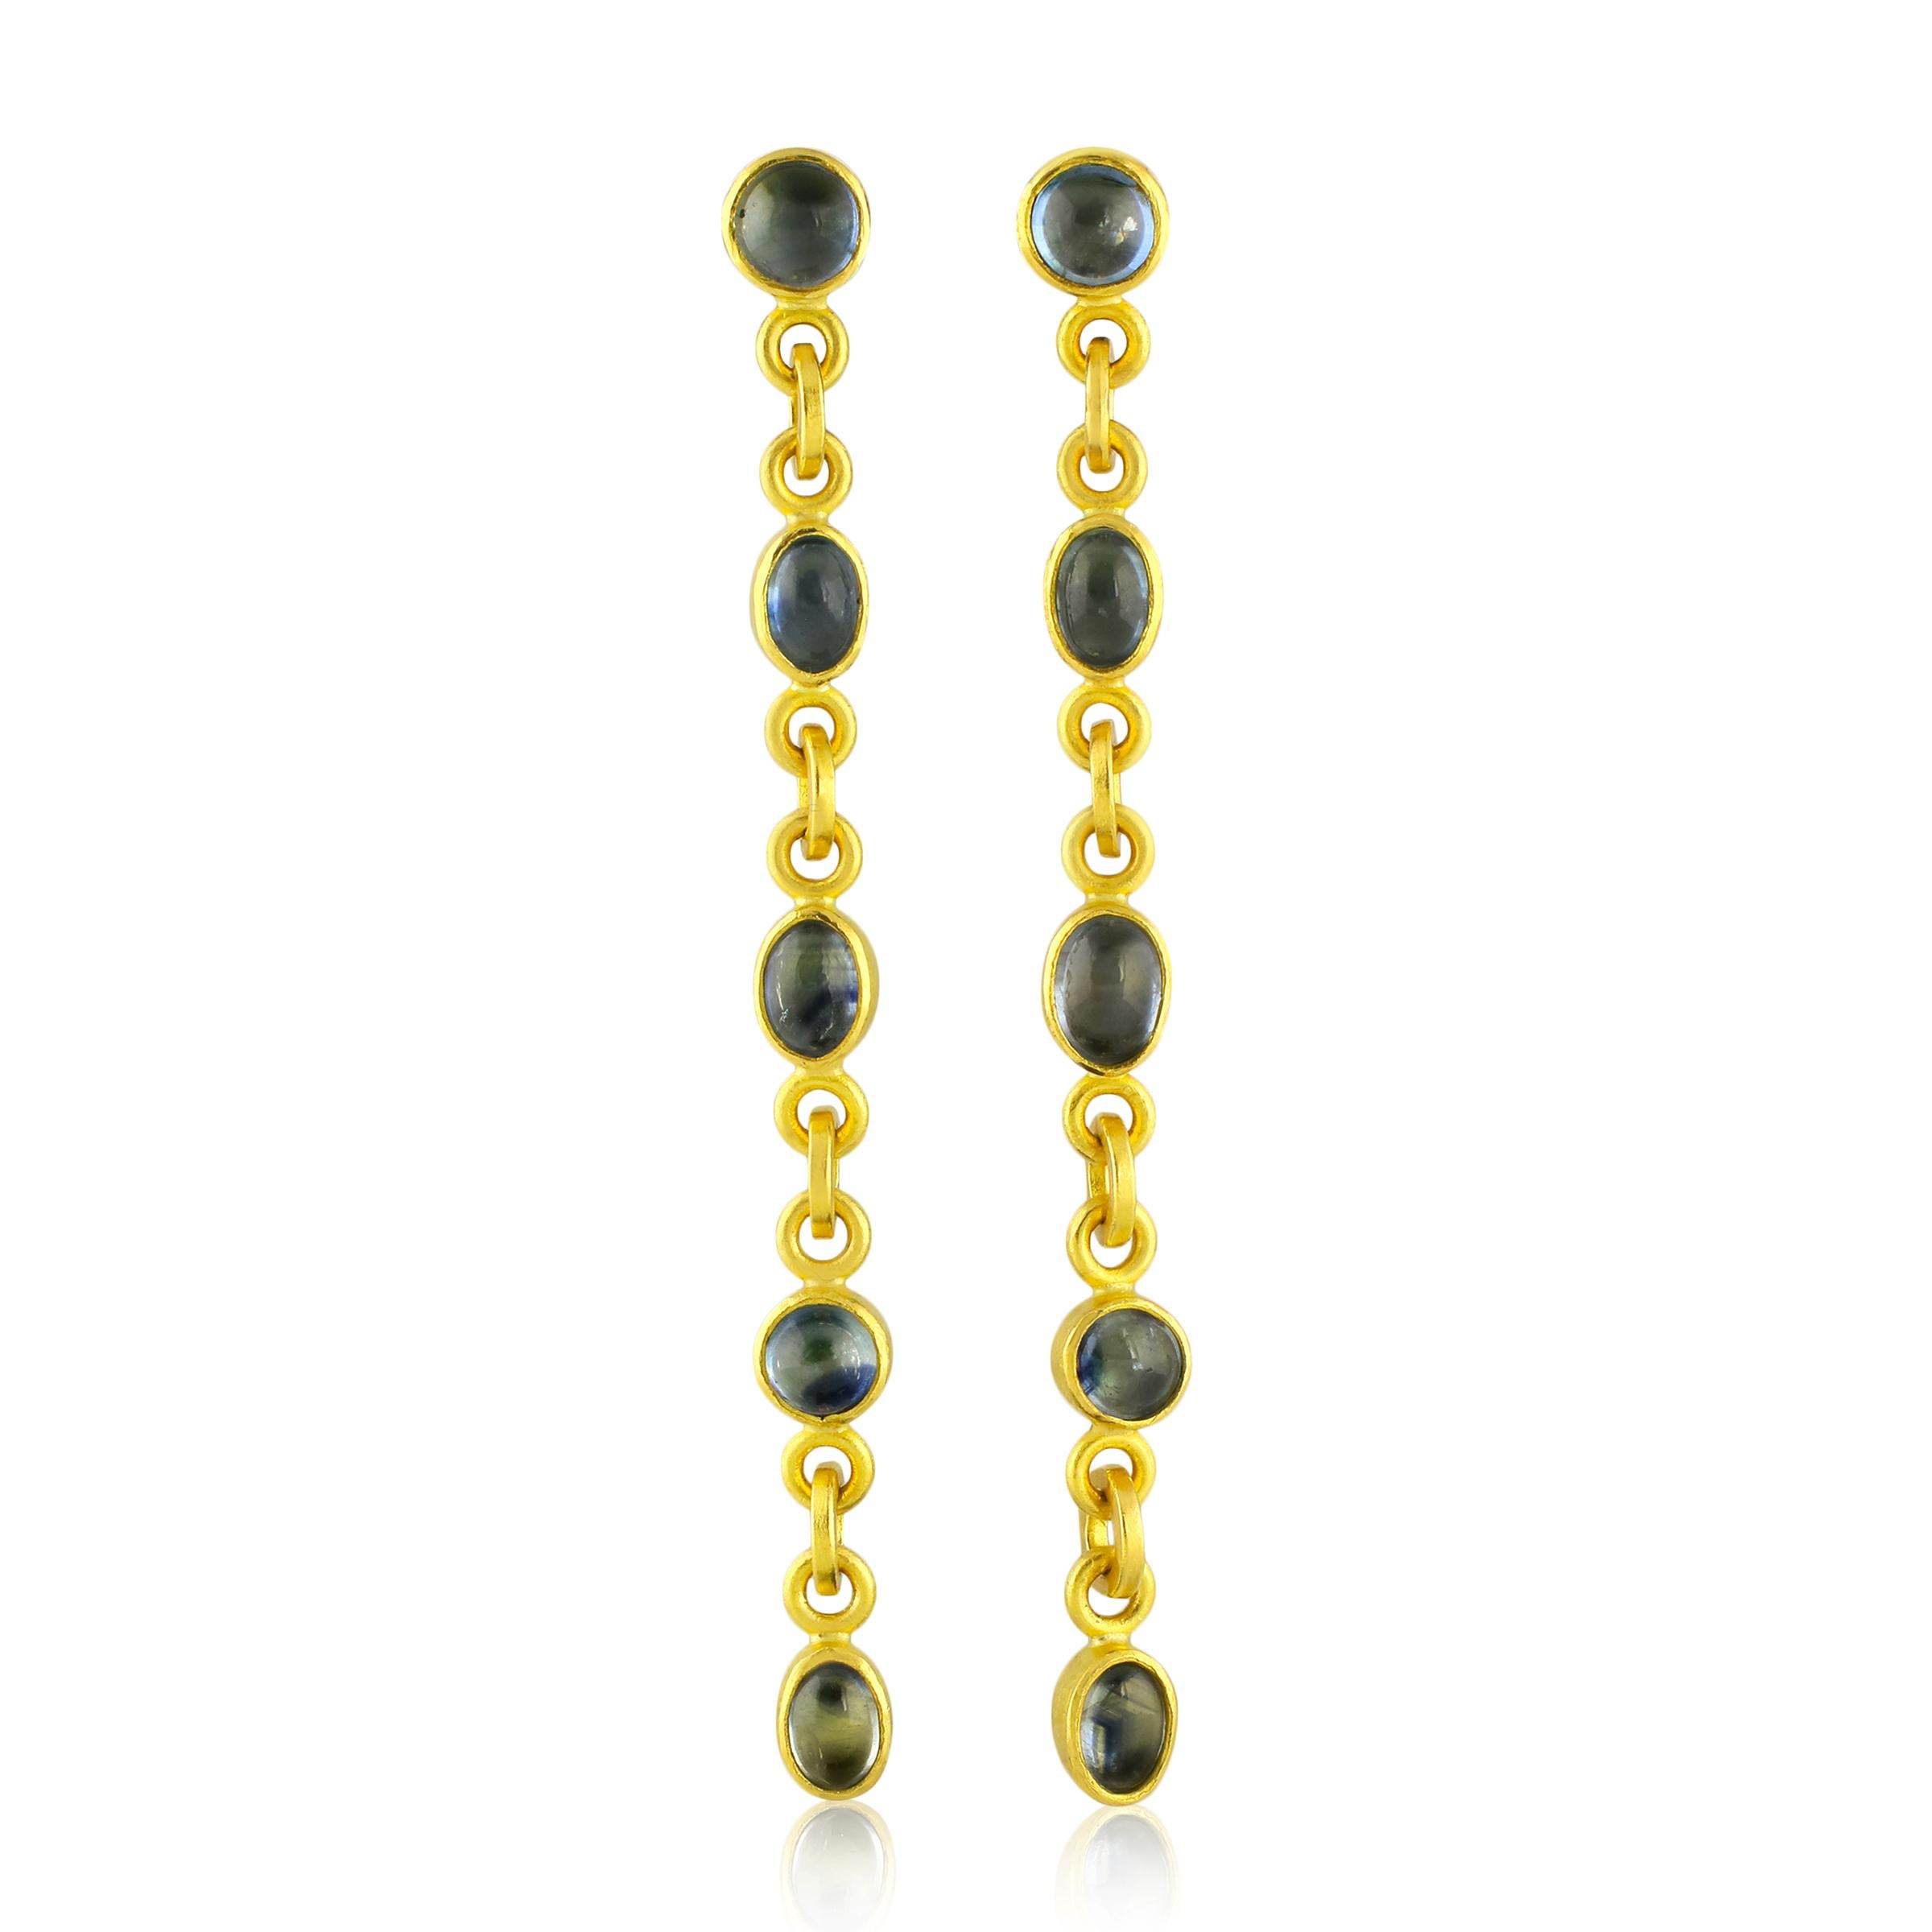 Artisan PHILIPPE SPENCER 22K & 20K Gold with 7.97 Ct. Sapphire Statement Earrings For Sale